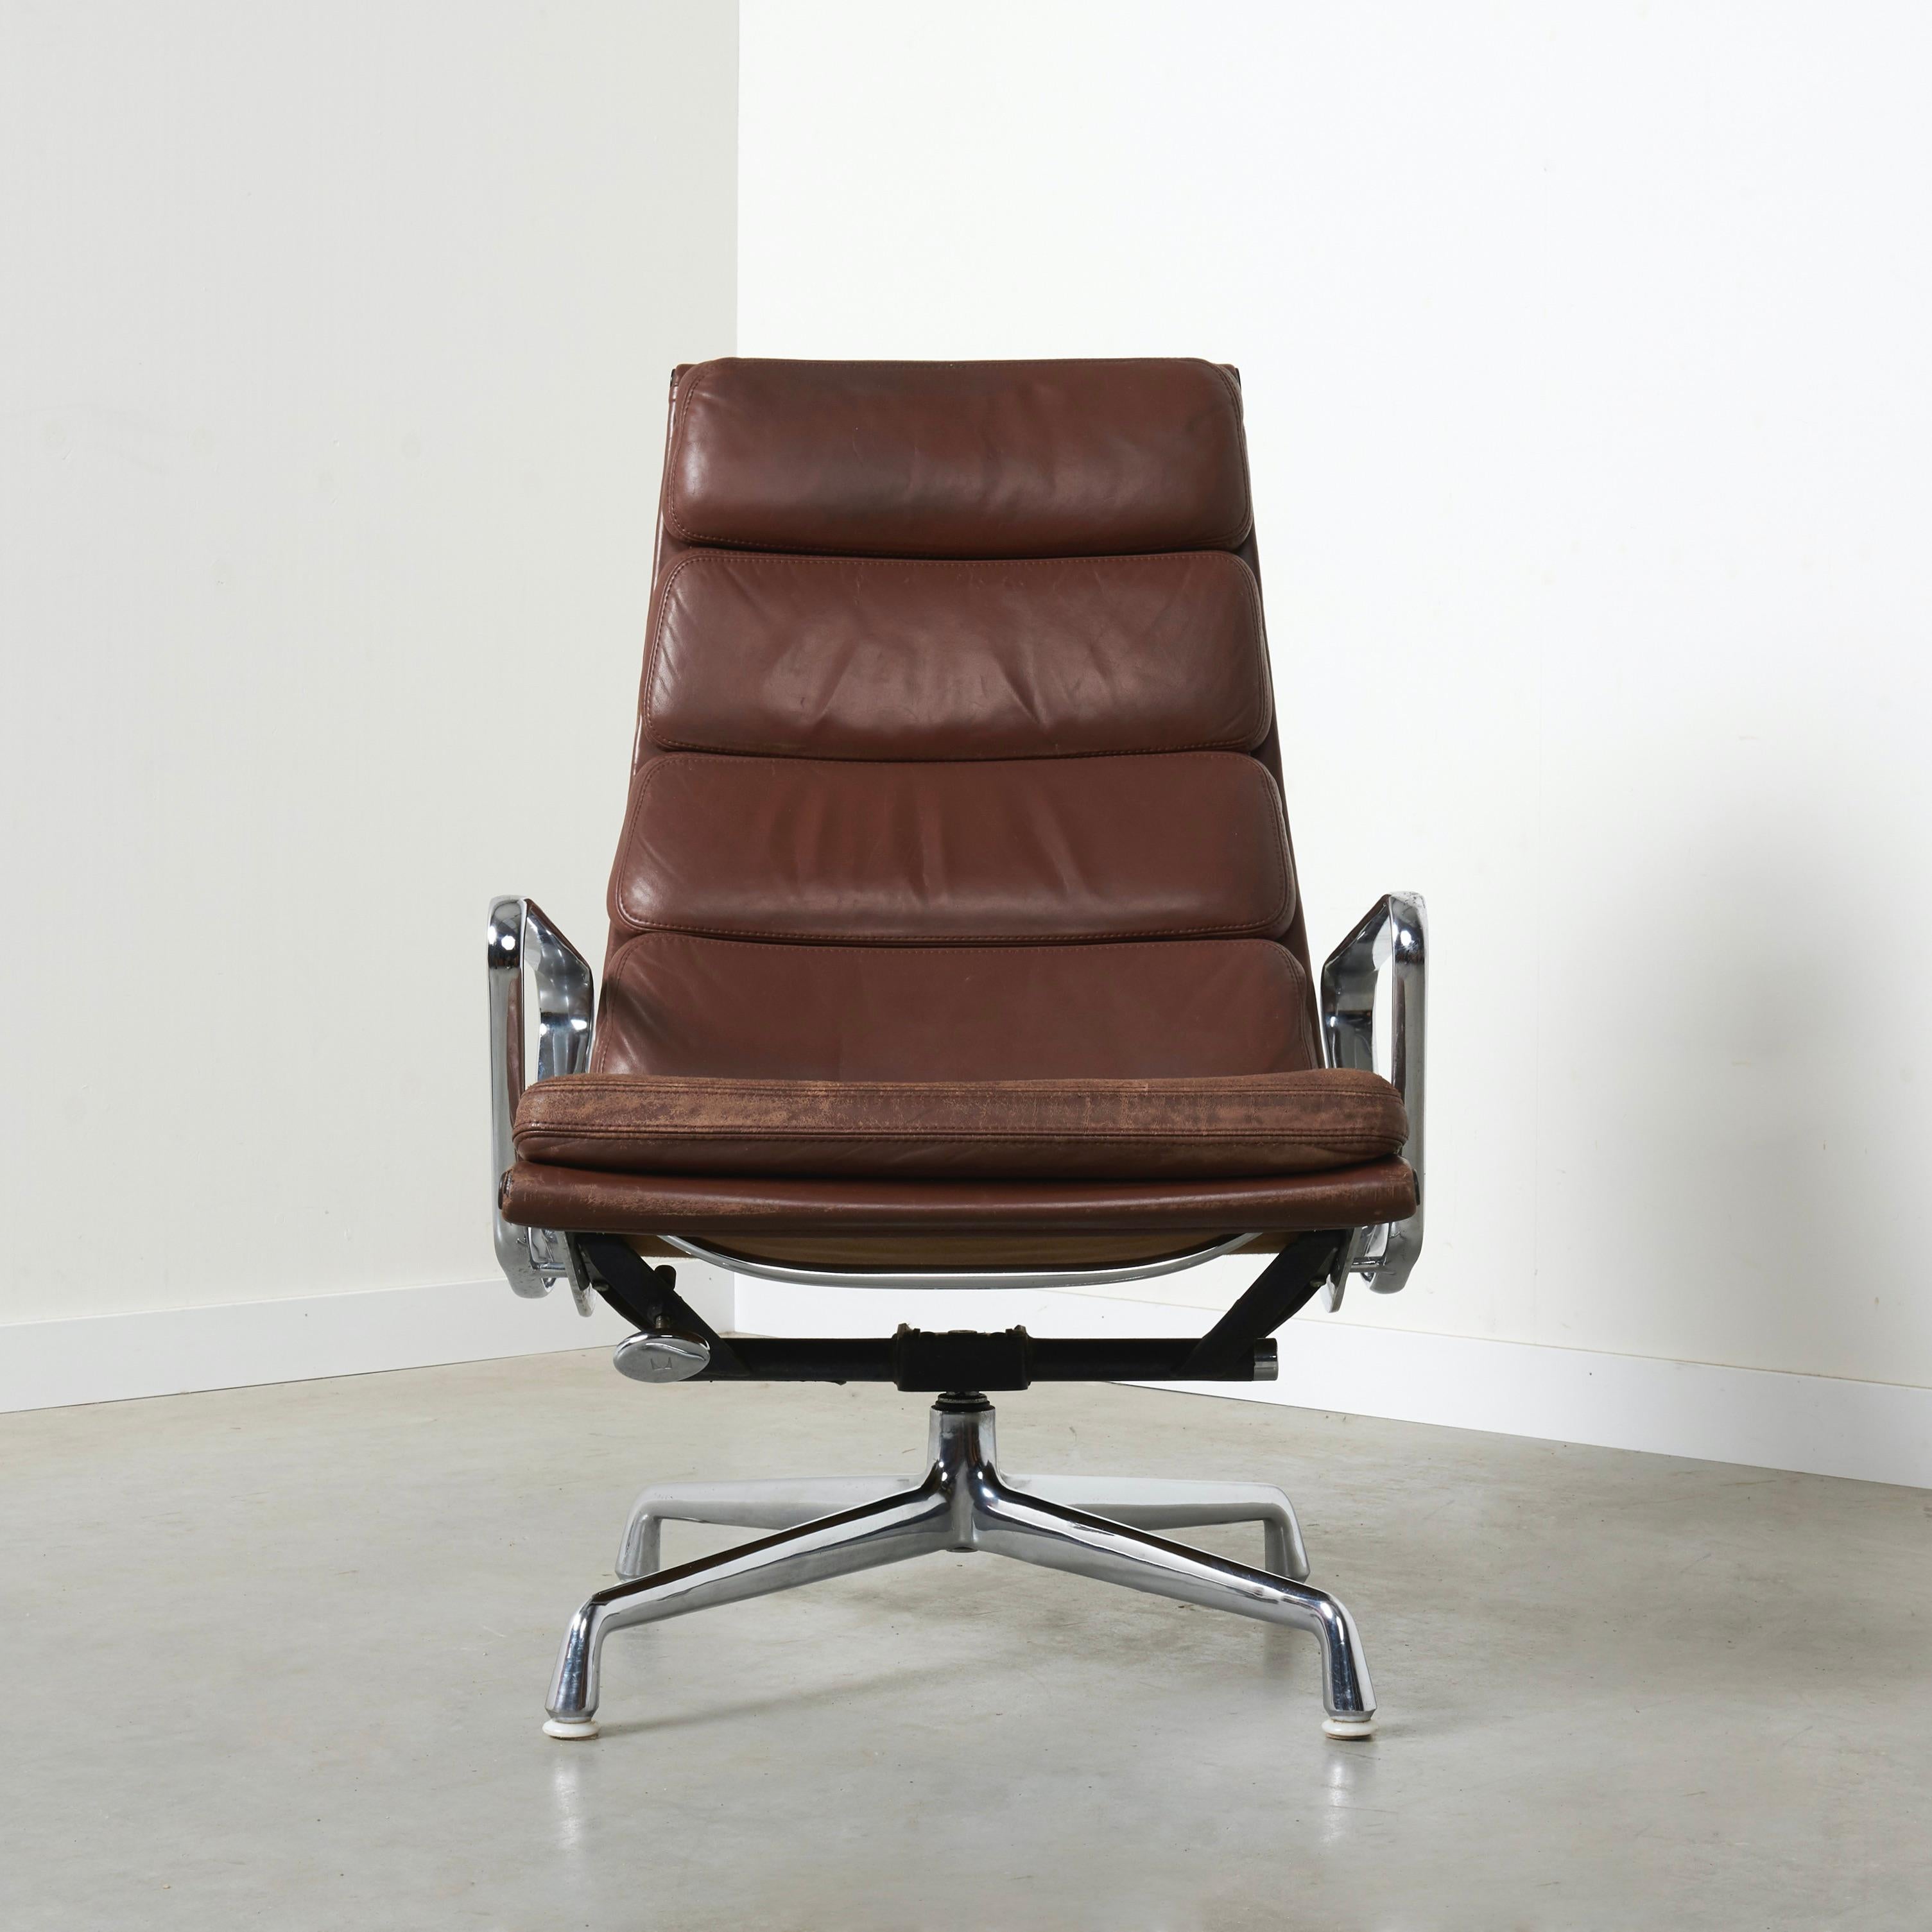 Early Herman Miller lounge chair EA222, designed by Charles & Ray Eames, 1960s production (assembled by Vitra).
Original leather soft pad upholstery with Hopsak backside, chrome aluminium 4 star base; swivel and tilting.
In a good vintage condition.